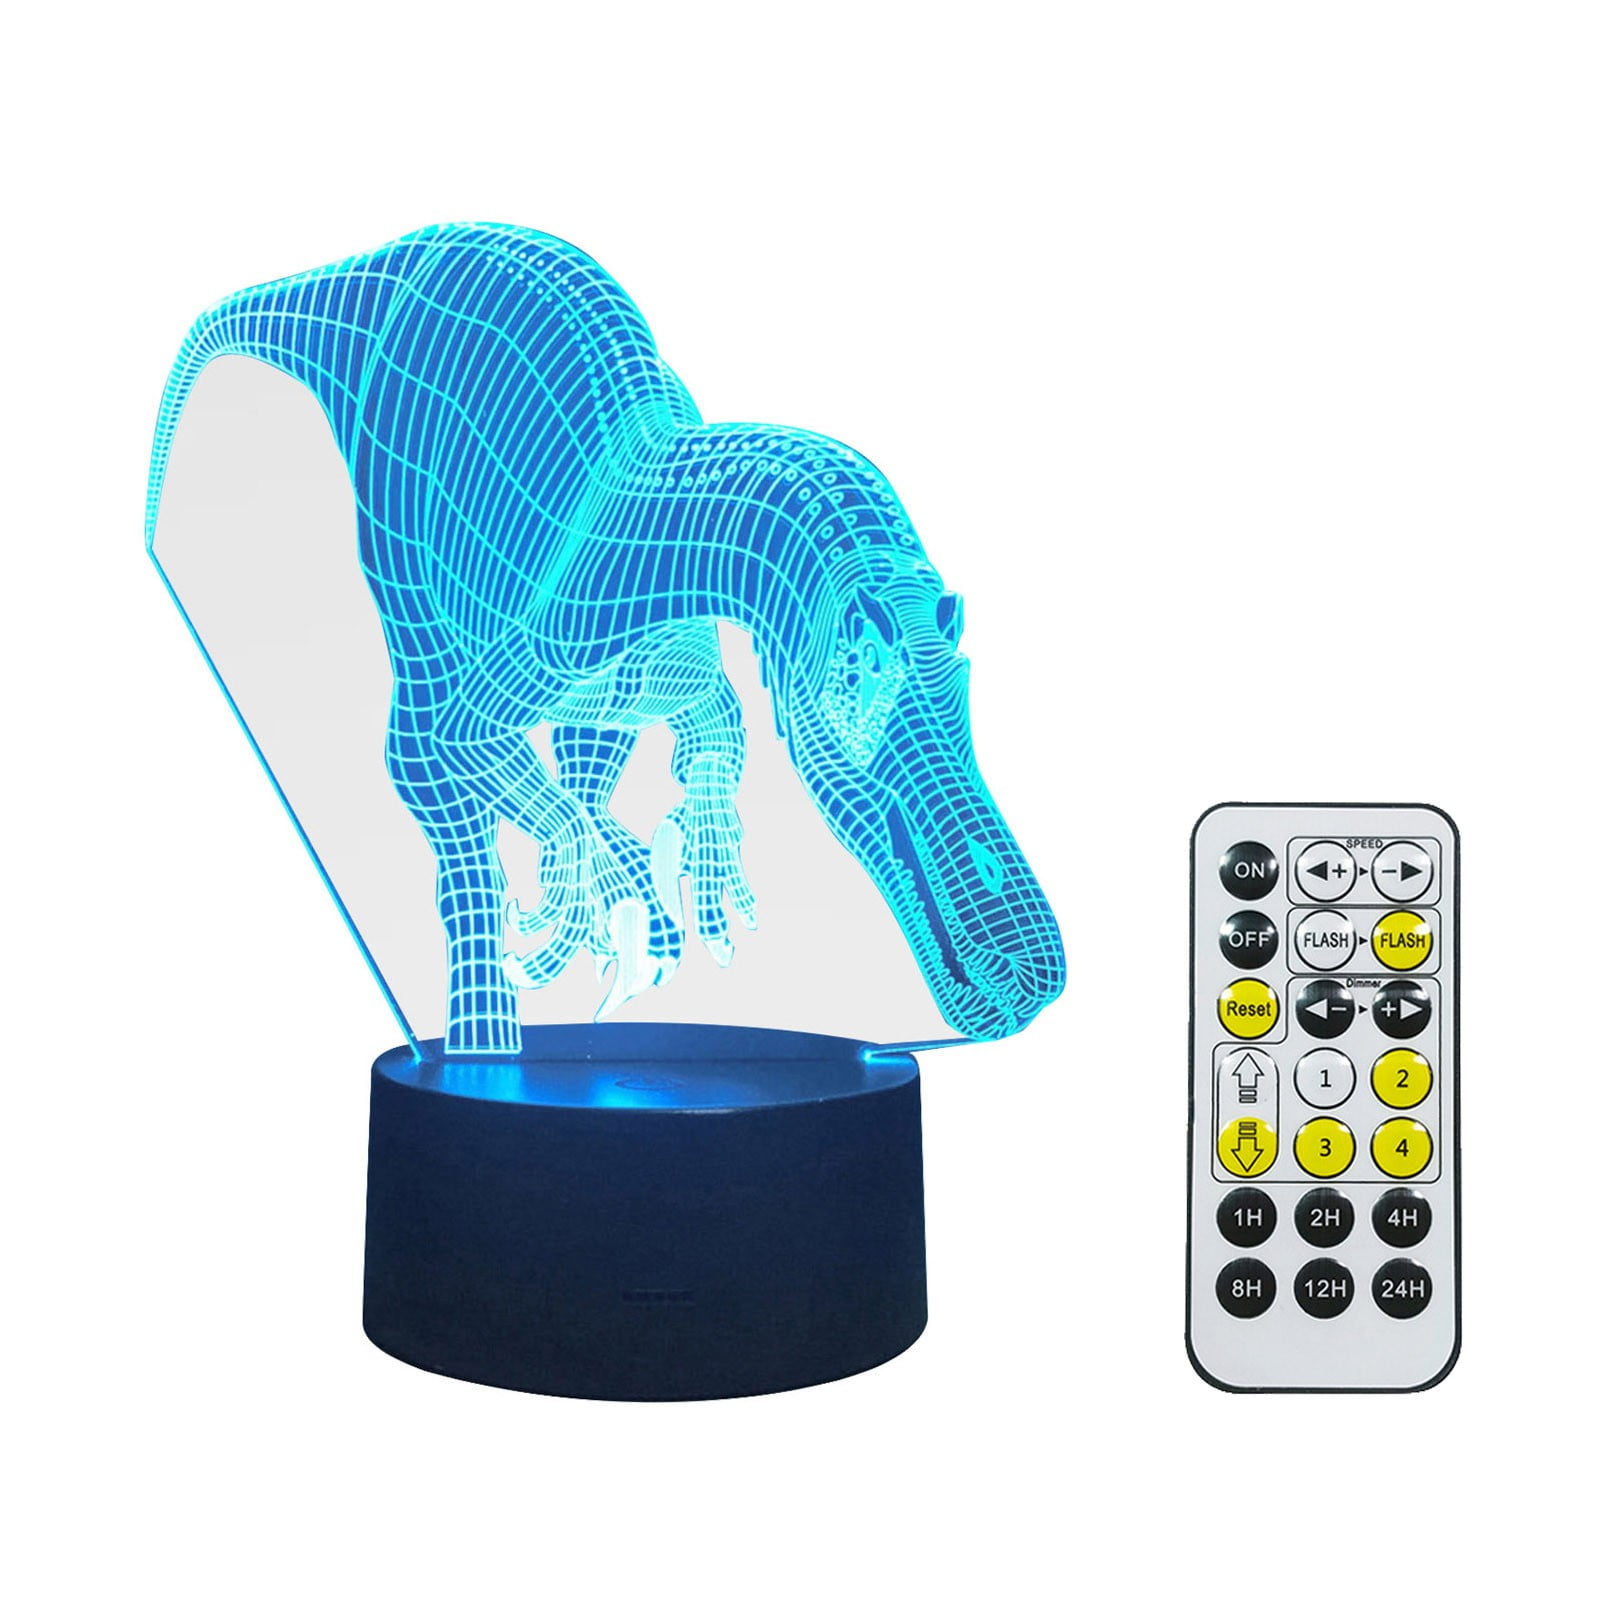 Horse 3D Night Light 16 Colors Change Touch and Remote Control LED Table Desk Lamp with USB Decorative Remote for Boys Girls Bedroom Birthday Gifts Winzwon 3D Optical Illusion Night Light 